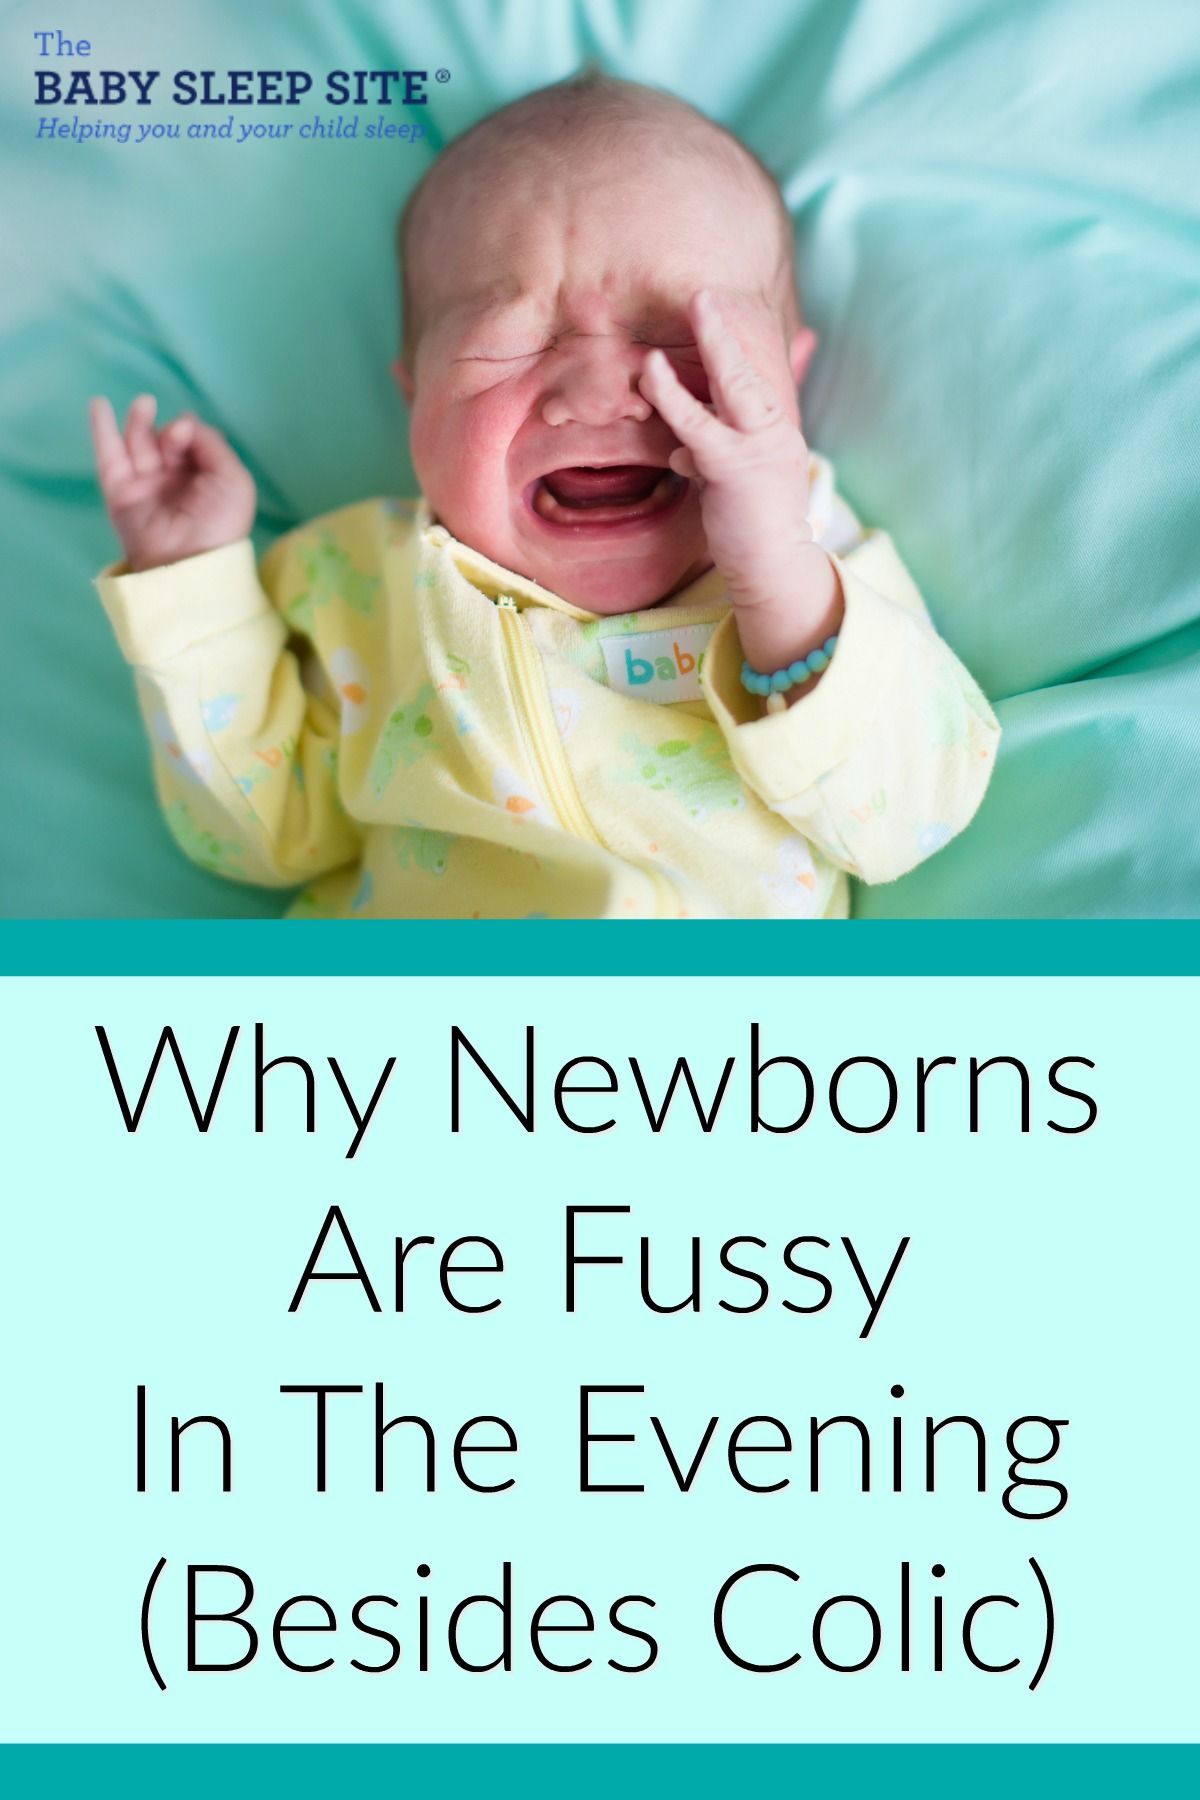 Why Newborns Are Fussing In The Evening Besides Colic ...